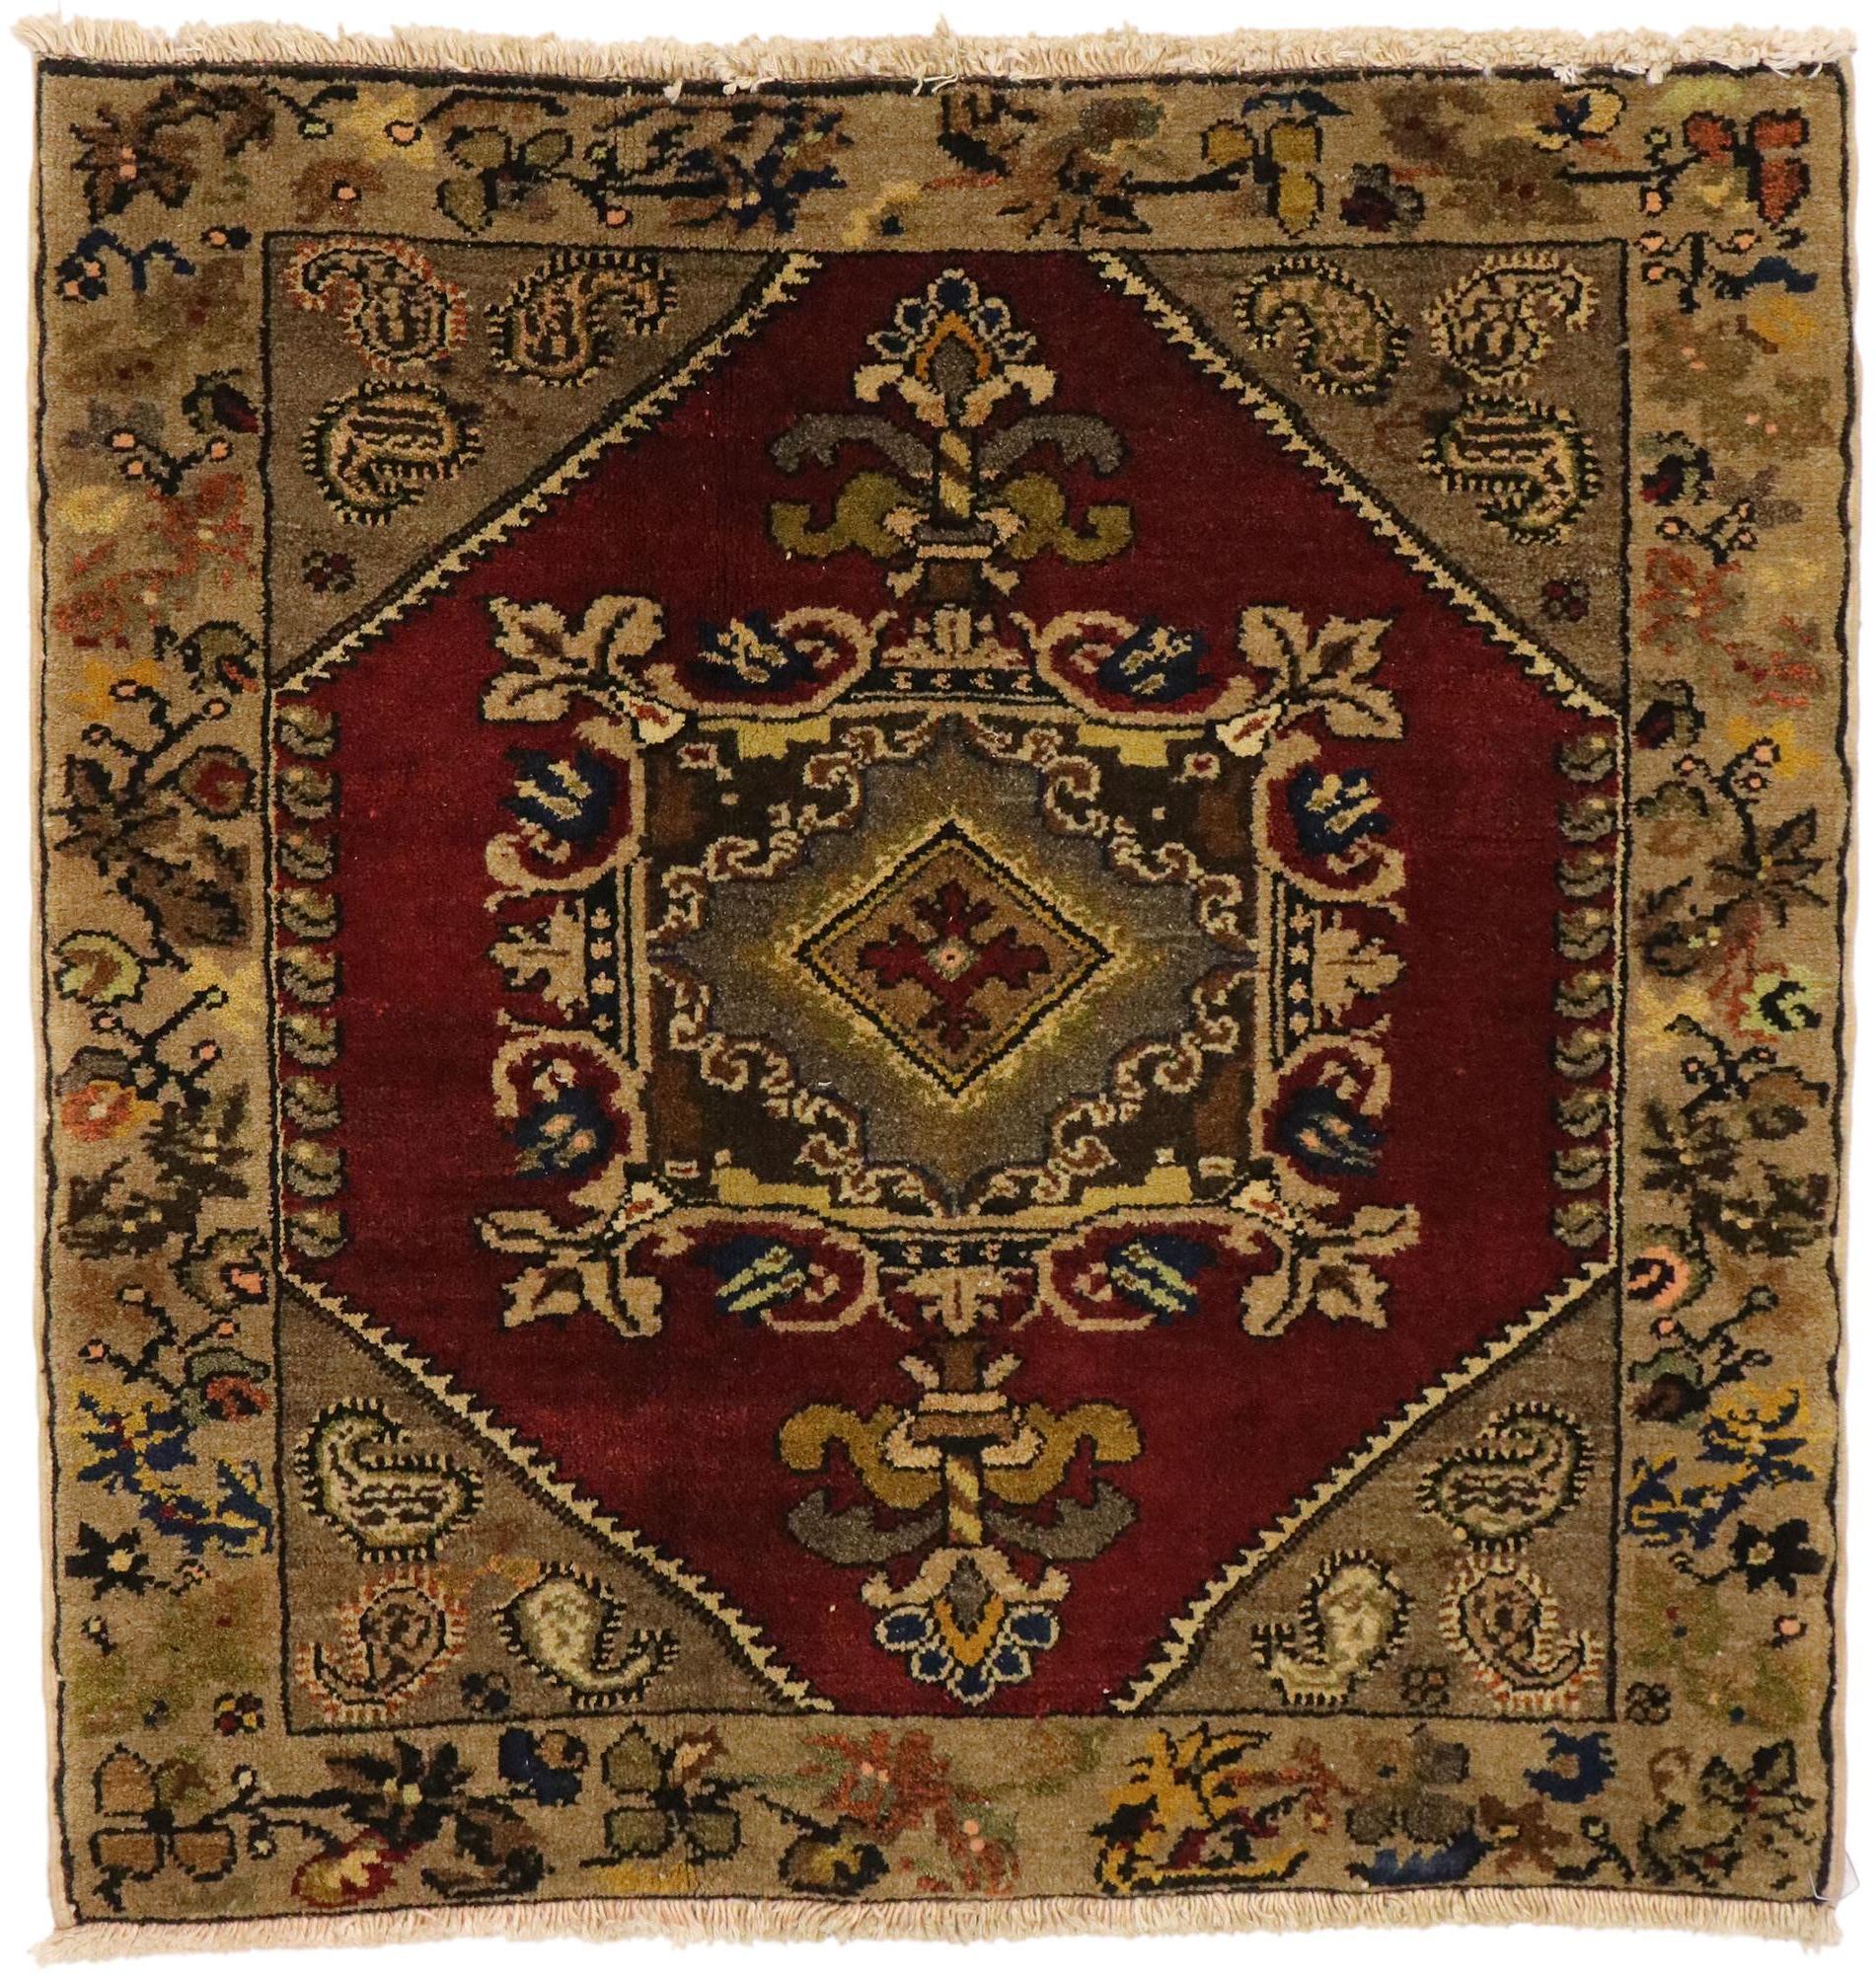 51416-51460 pair of vintage Turkish Oushak Yastik rugs, small accent rugs. Immersed in Anatolian history and refined colors, this pair of matching vintage Turkish Oushak yastik scatter rugs combines simplicity with sophistication. Each small accent